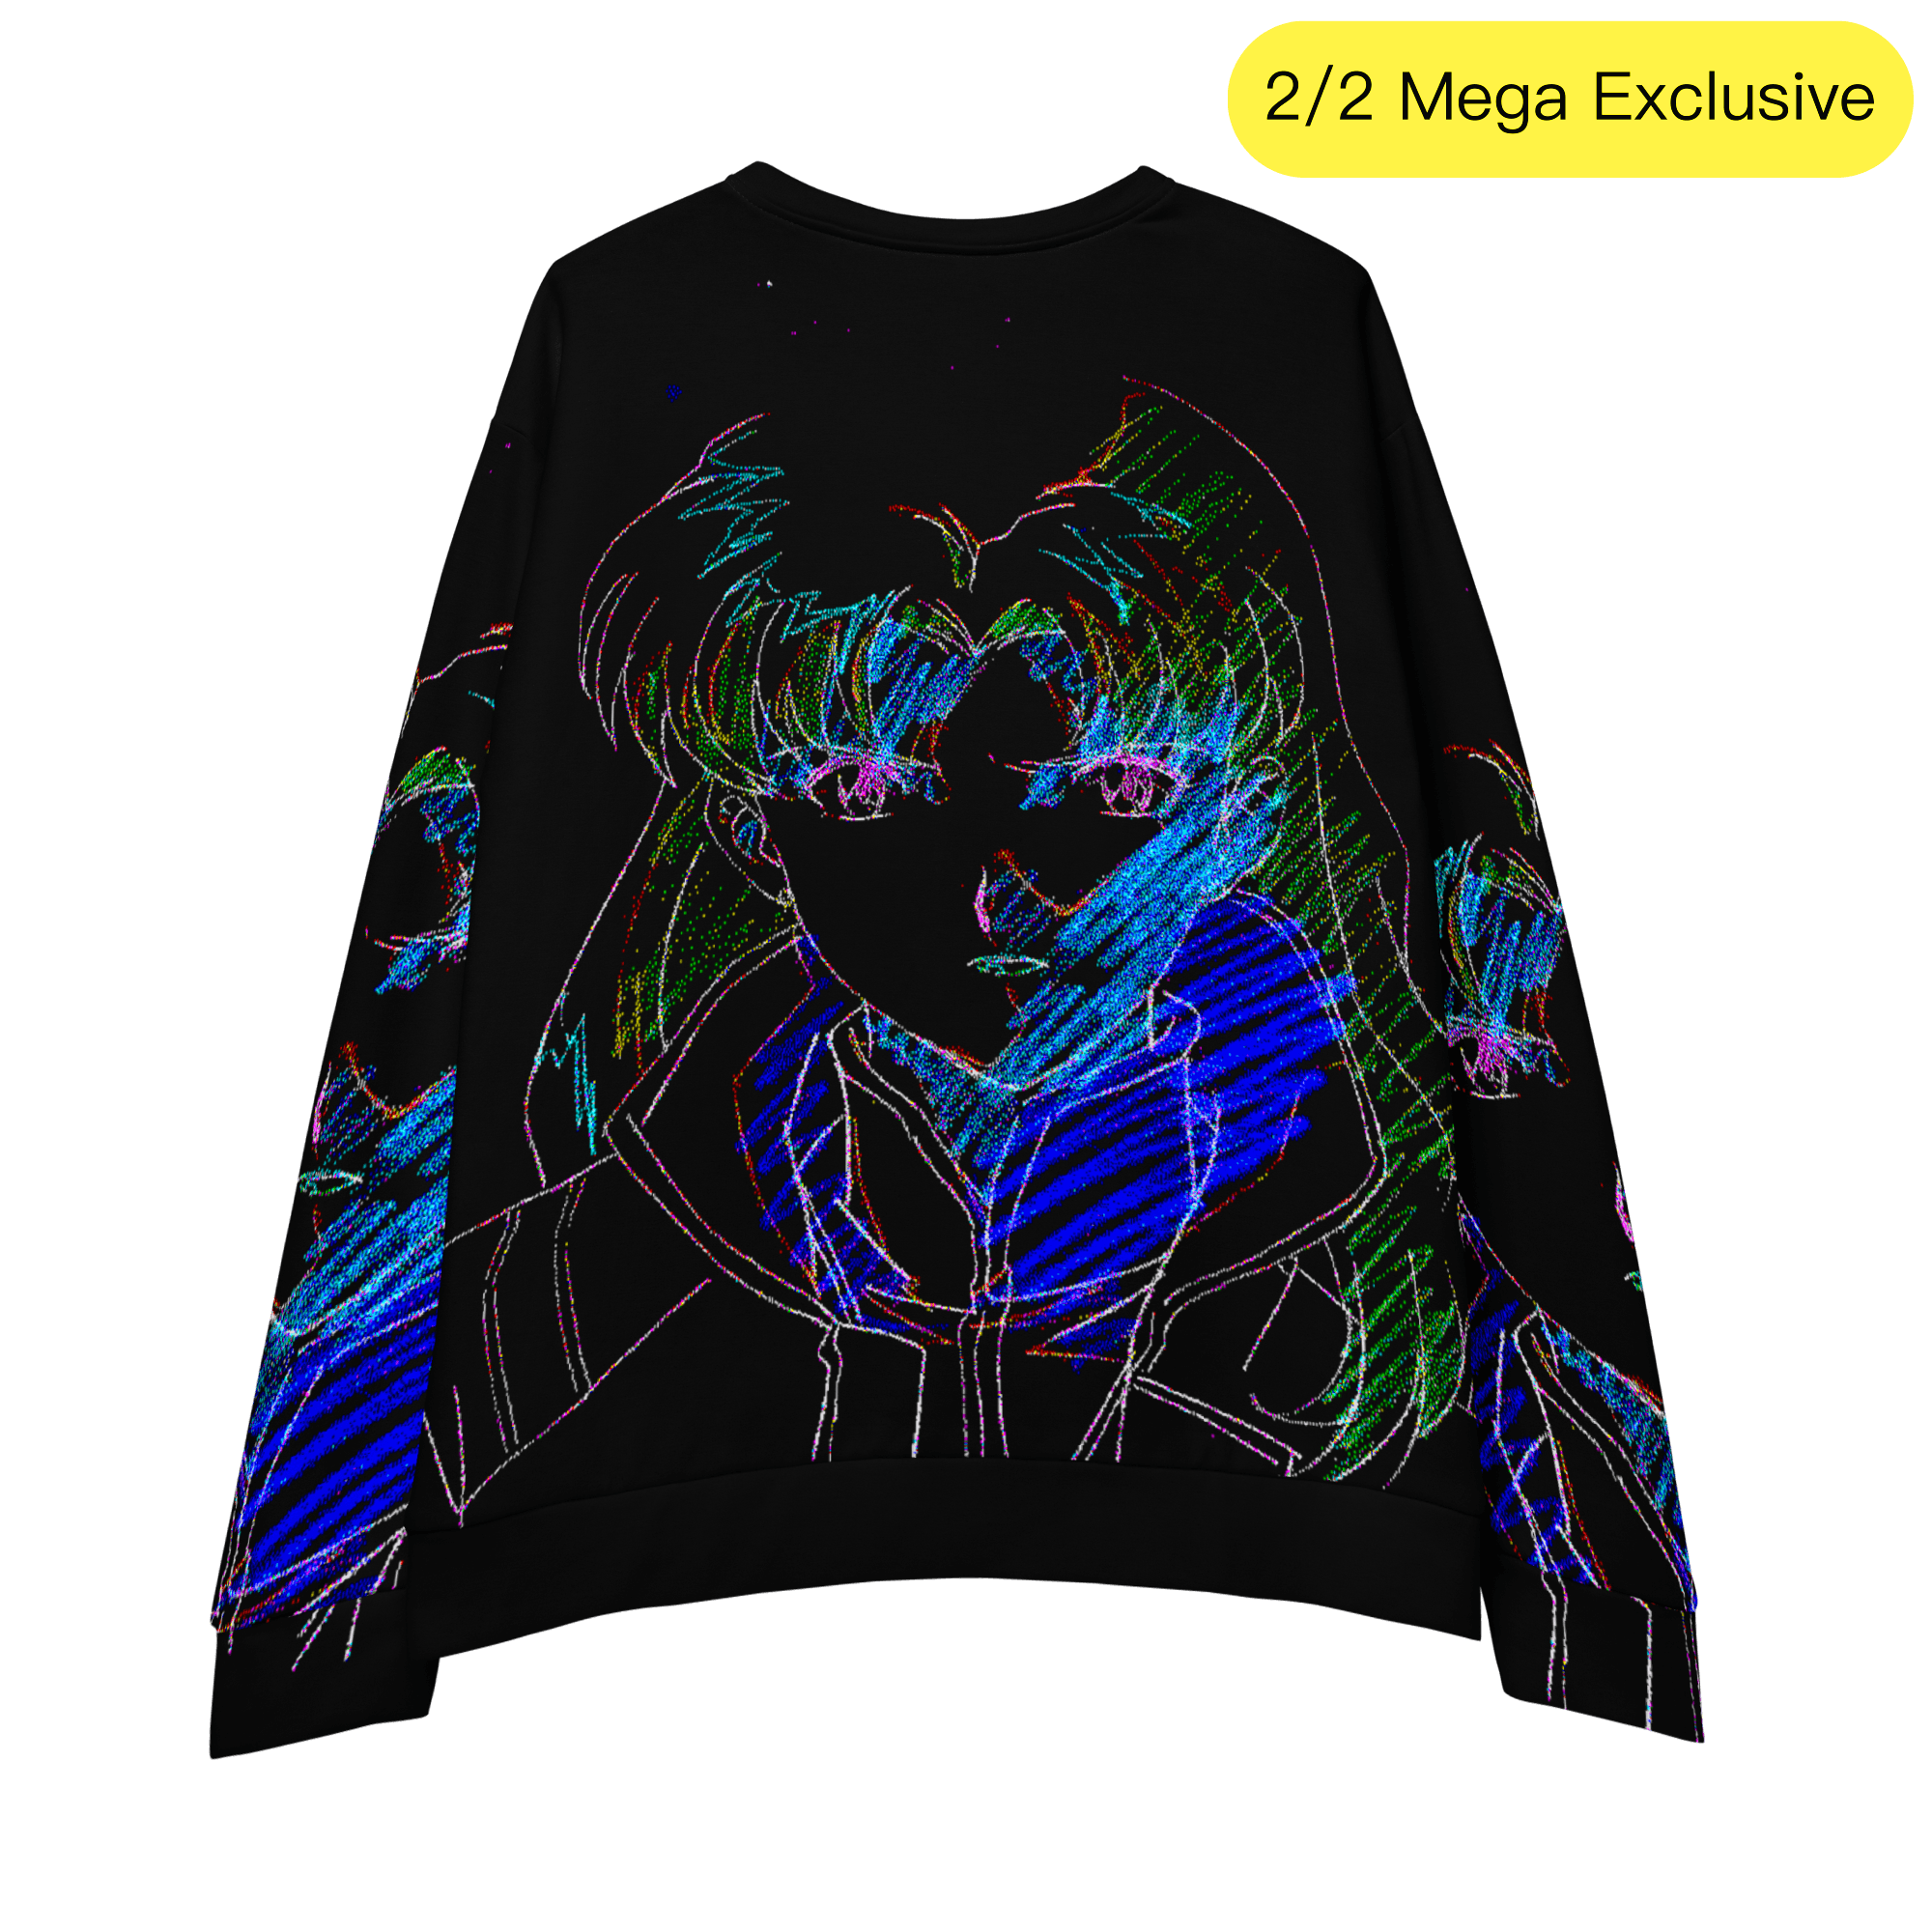 It's Complicated 4® Deluxe Light Sweatshirt (2 pieces only 2/2) ⭐️ - Kikillo Club